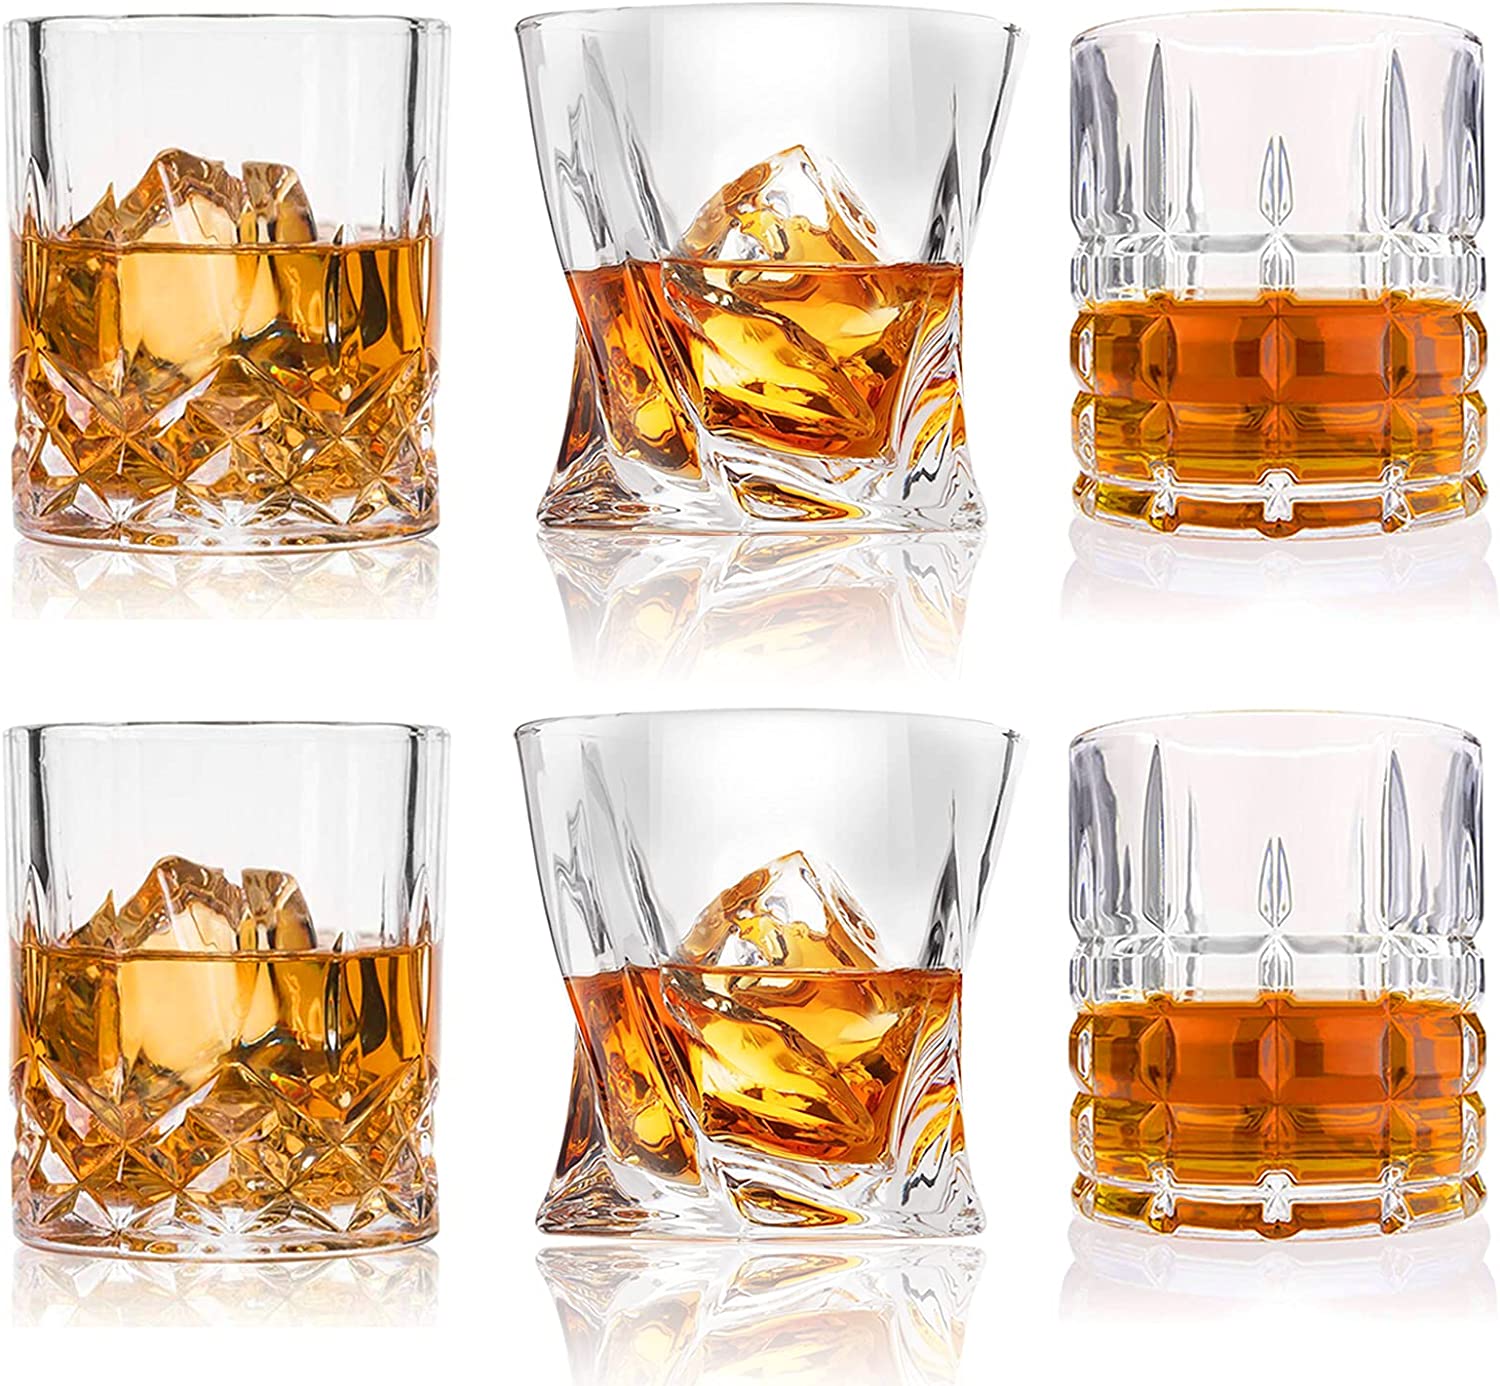 DeeCoo Clear Crystal Whiskey Glasses, Set Of 6